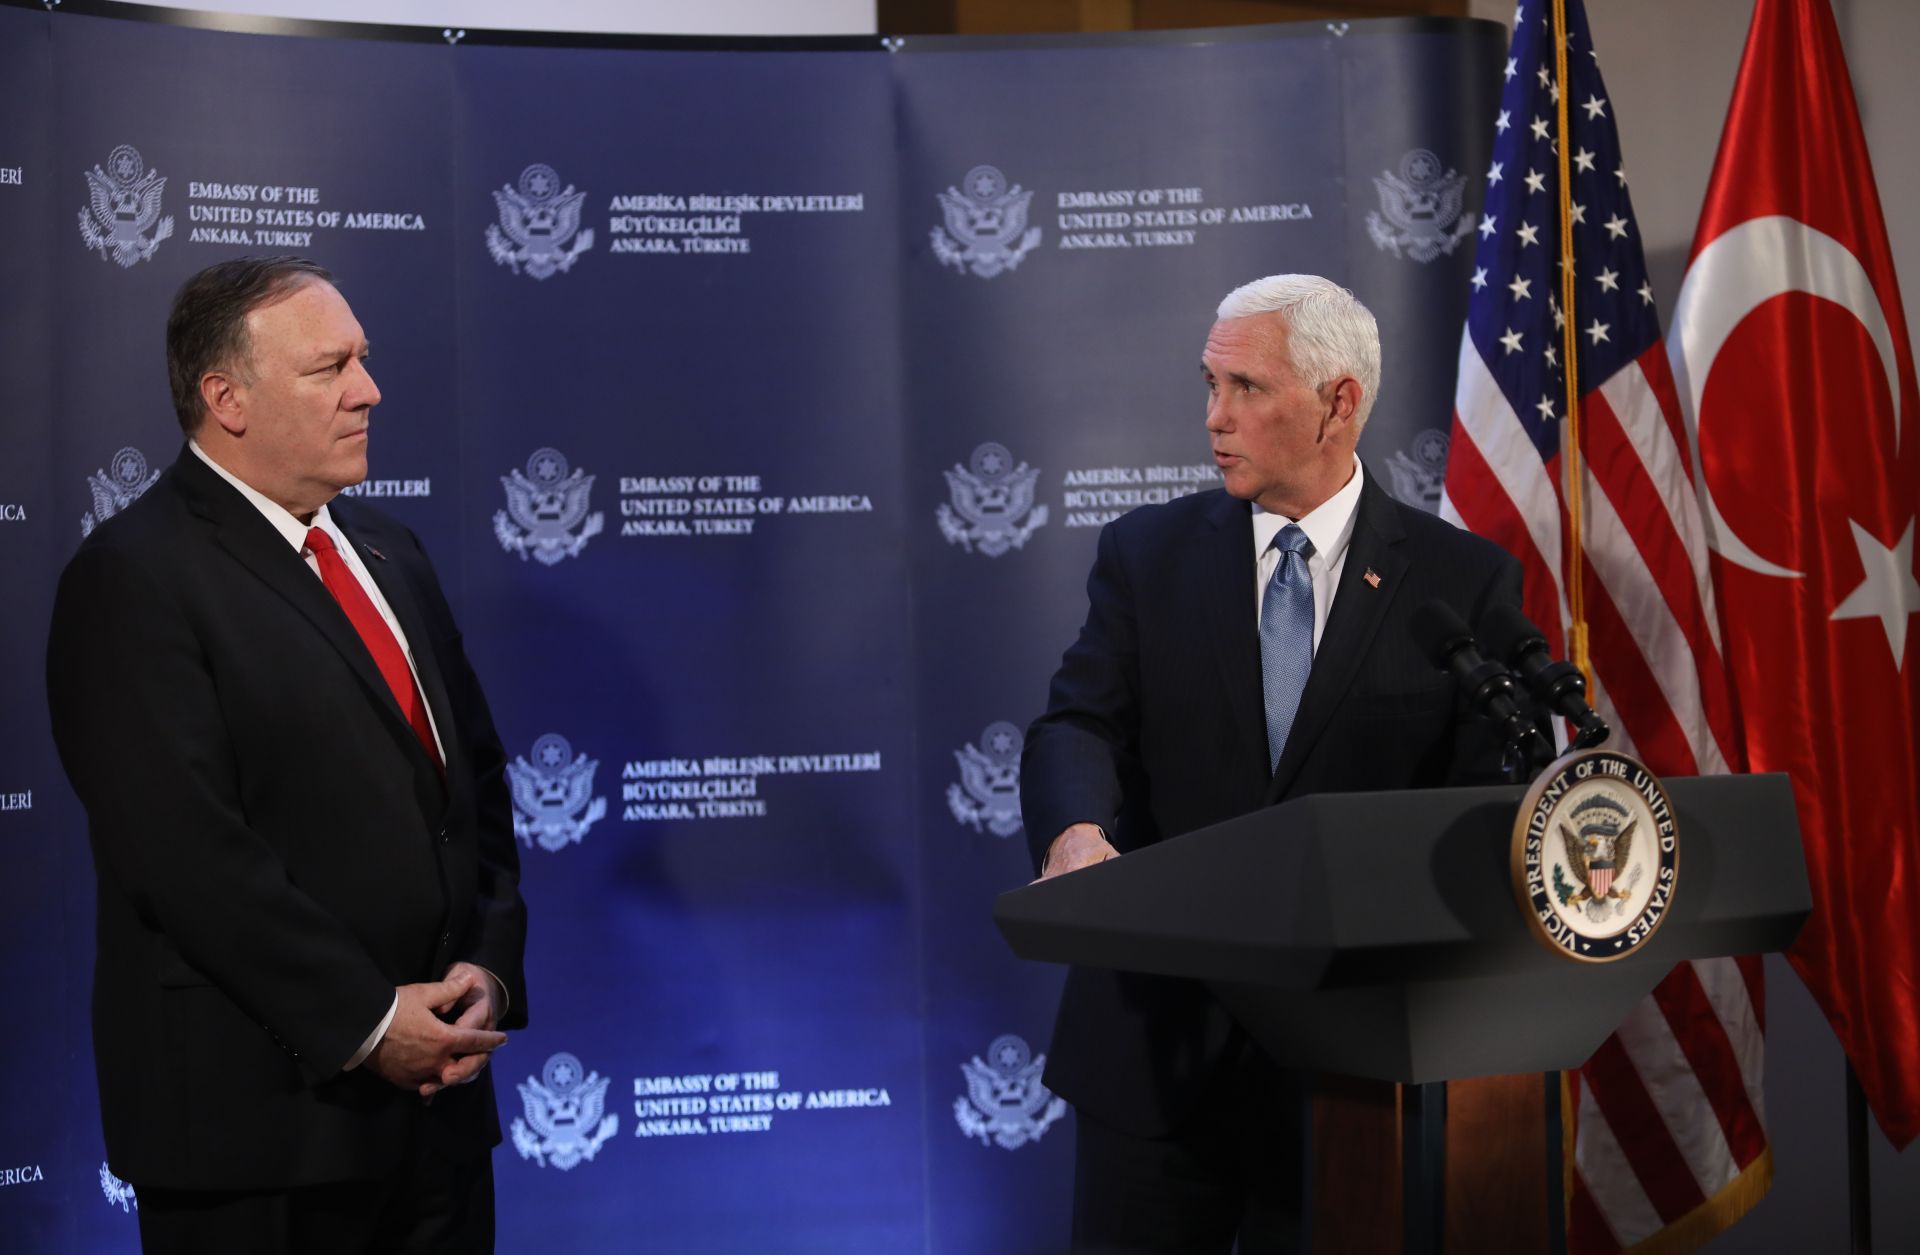 U.S. Secretary of State Mike Pompeo, left, and U.S. Vice President Mike Pence hold a news conference at the U.S. Embassy in Ankara, Turkey, on Oct. 17, 2019.